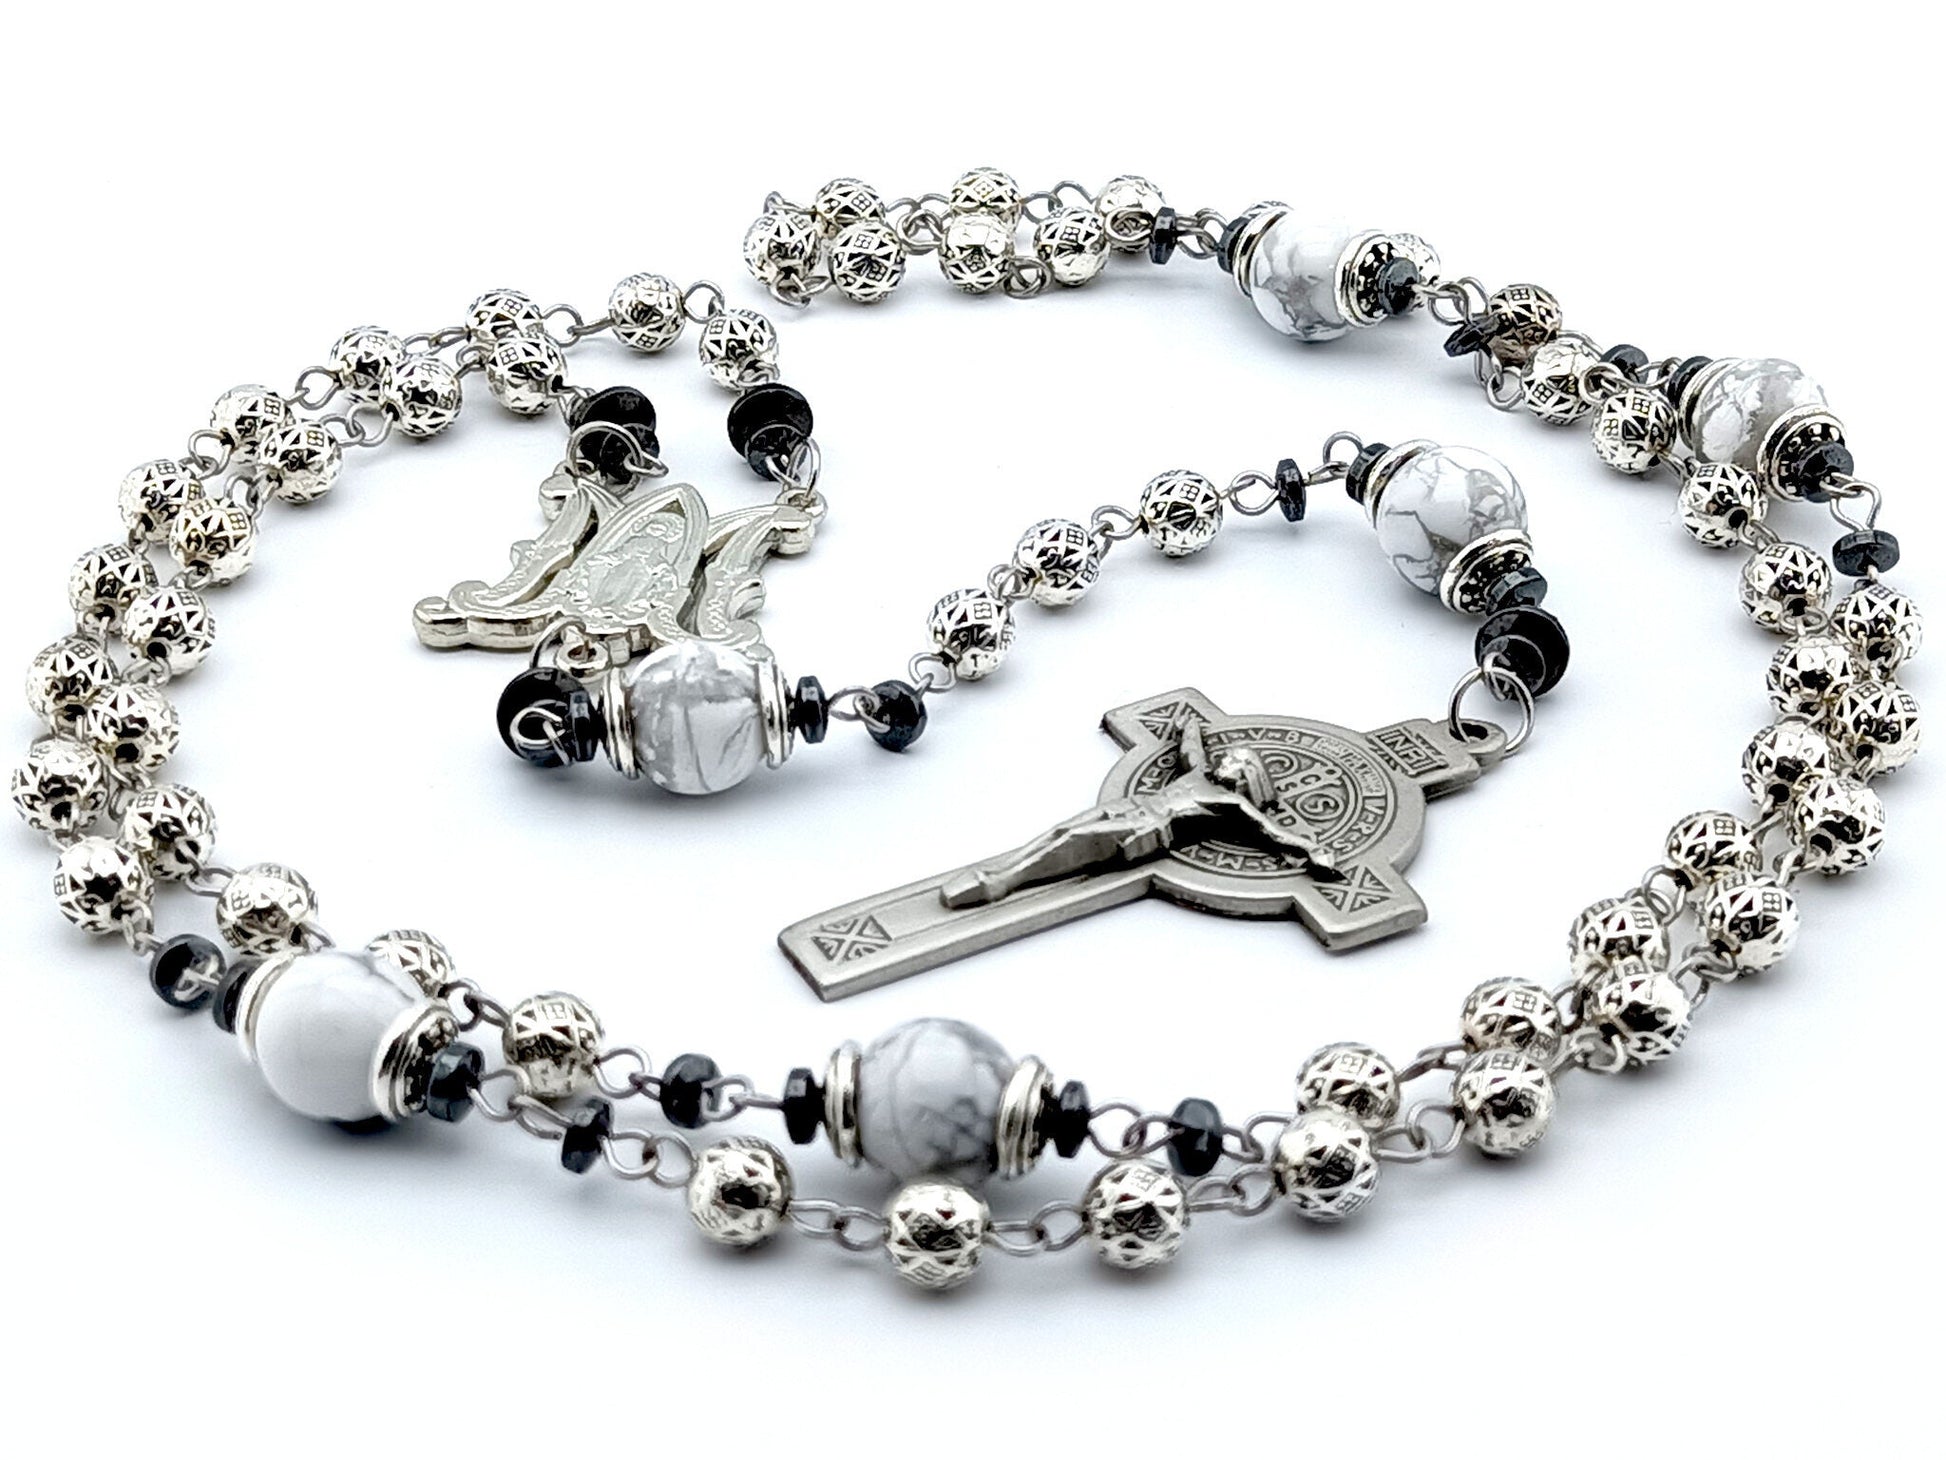 Saint Benedict unique rosary beads with silver metal beads, pewter Saint Benedict crucifix, silver miraculous medal centre and white gemstone pater beads.